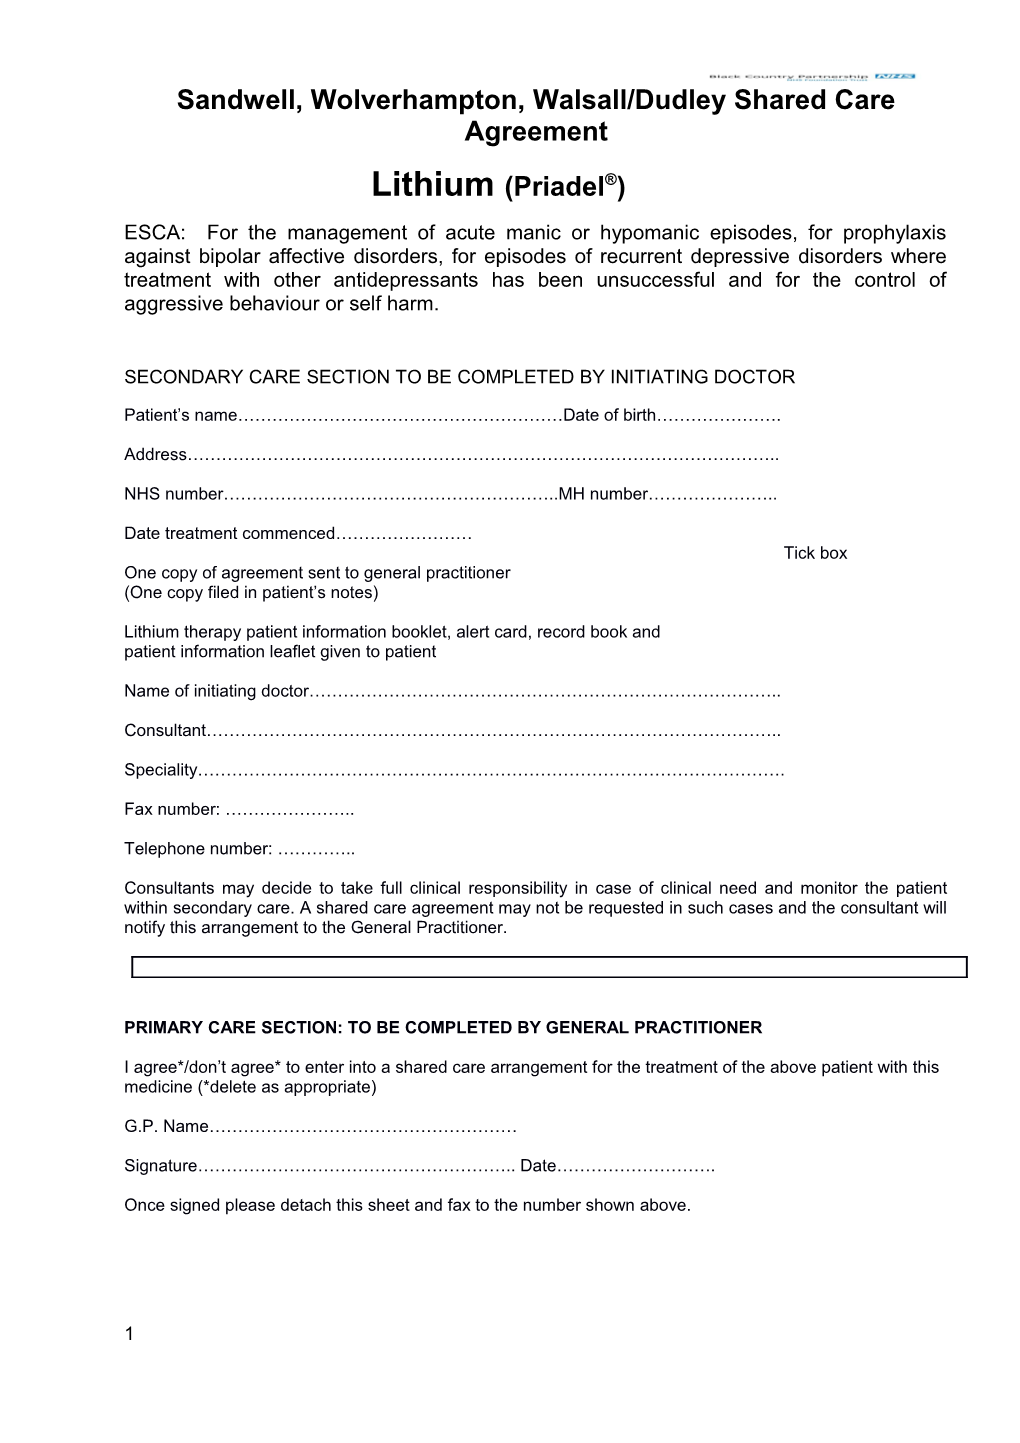 Sandwell, Wolverhampton, Walsall/Dudley Shared Care Agreement